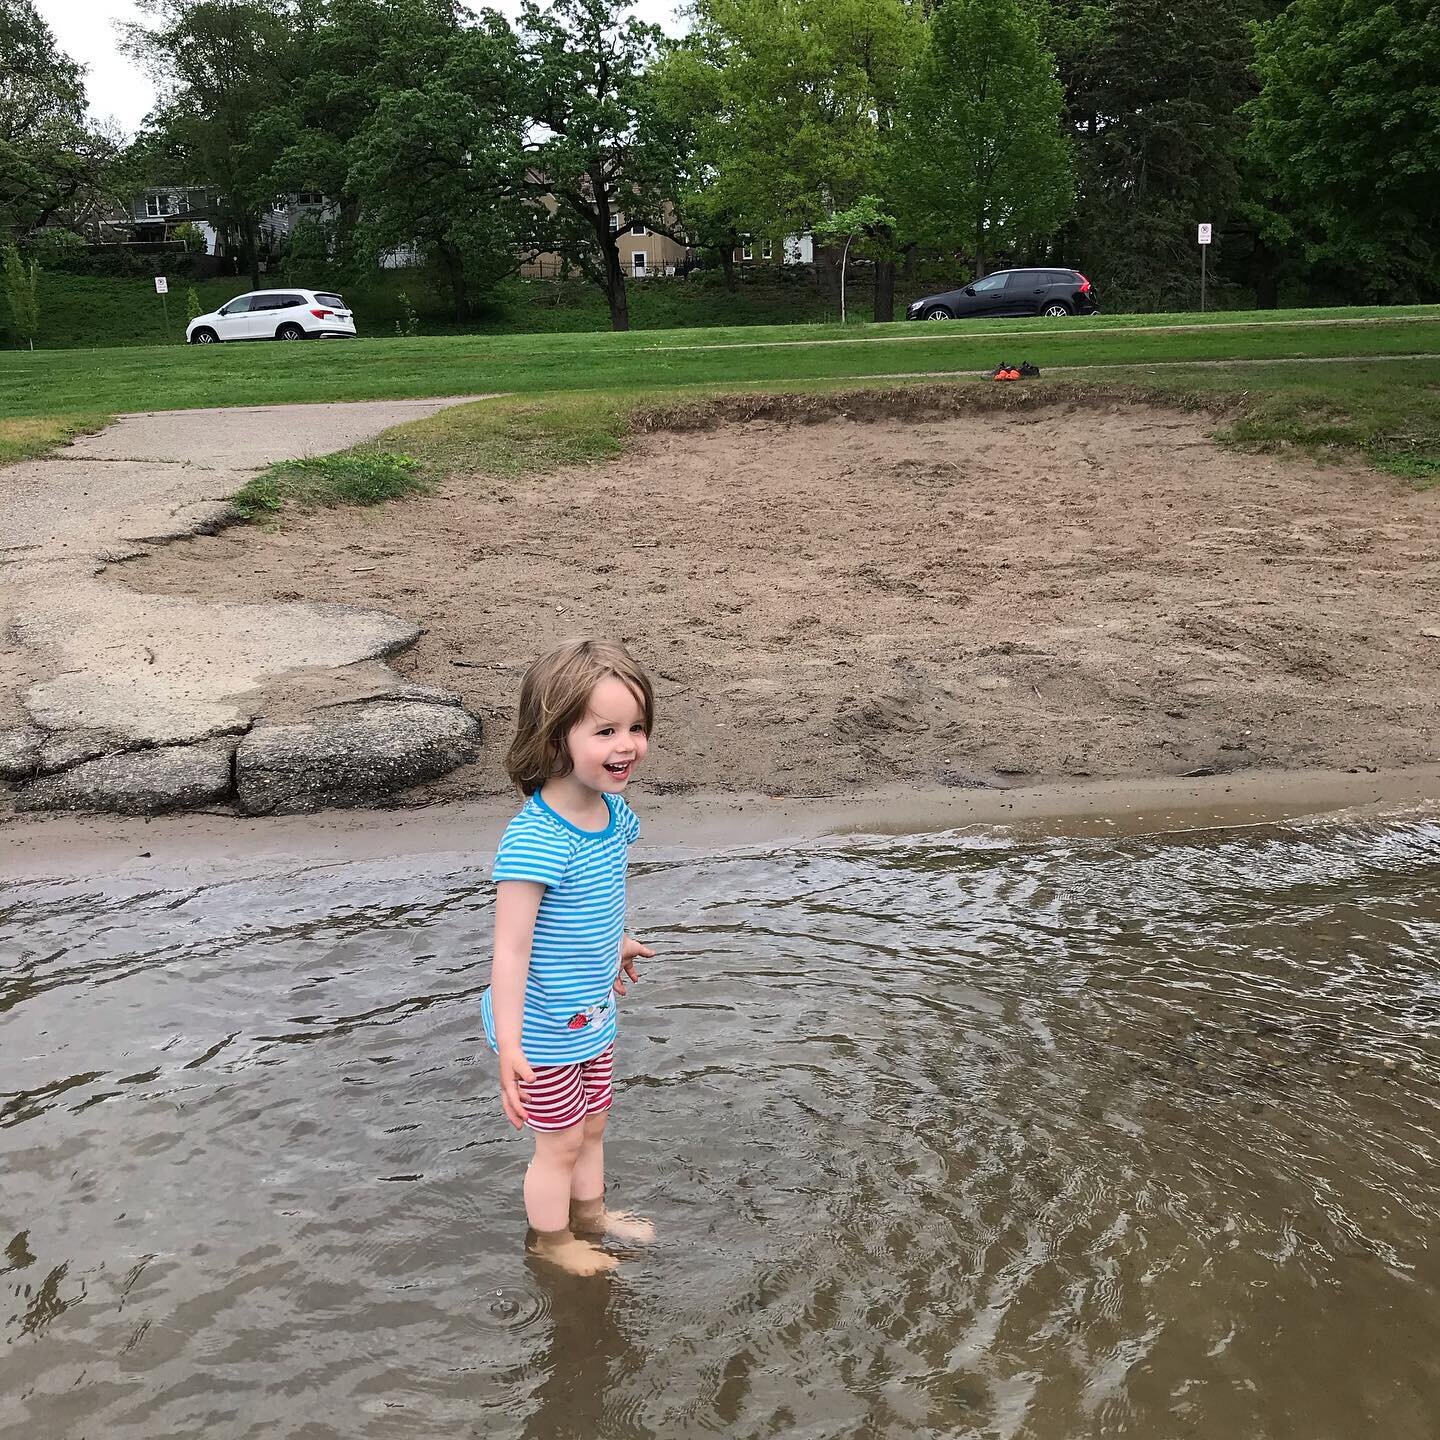 My kid is a water kid, taking after her dad. At three she loves to &ldquo;dip our toes in&rdquo; or &ldquo;go to the cabin.&rdquo; Can&rsquo;t wait to share the lakes with her this summer. 
#dadndaughter #minnesotakid #lakenokomis #minneapolis #headi